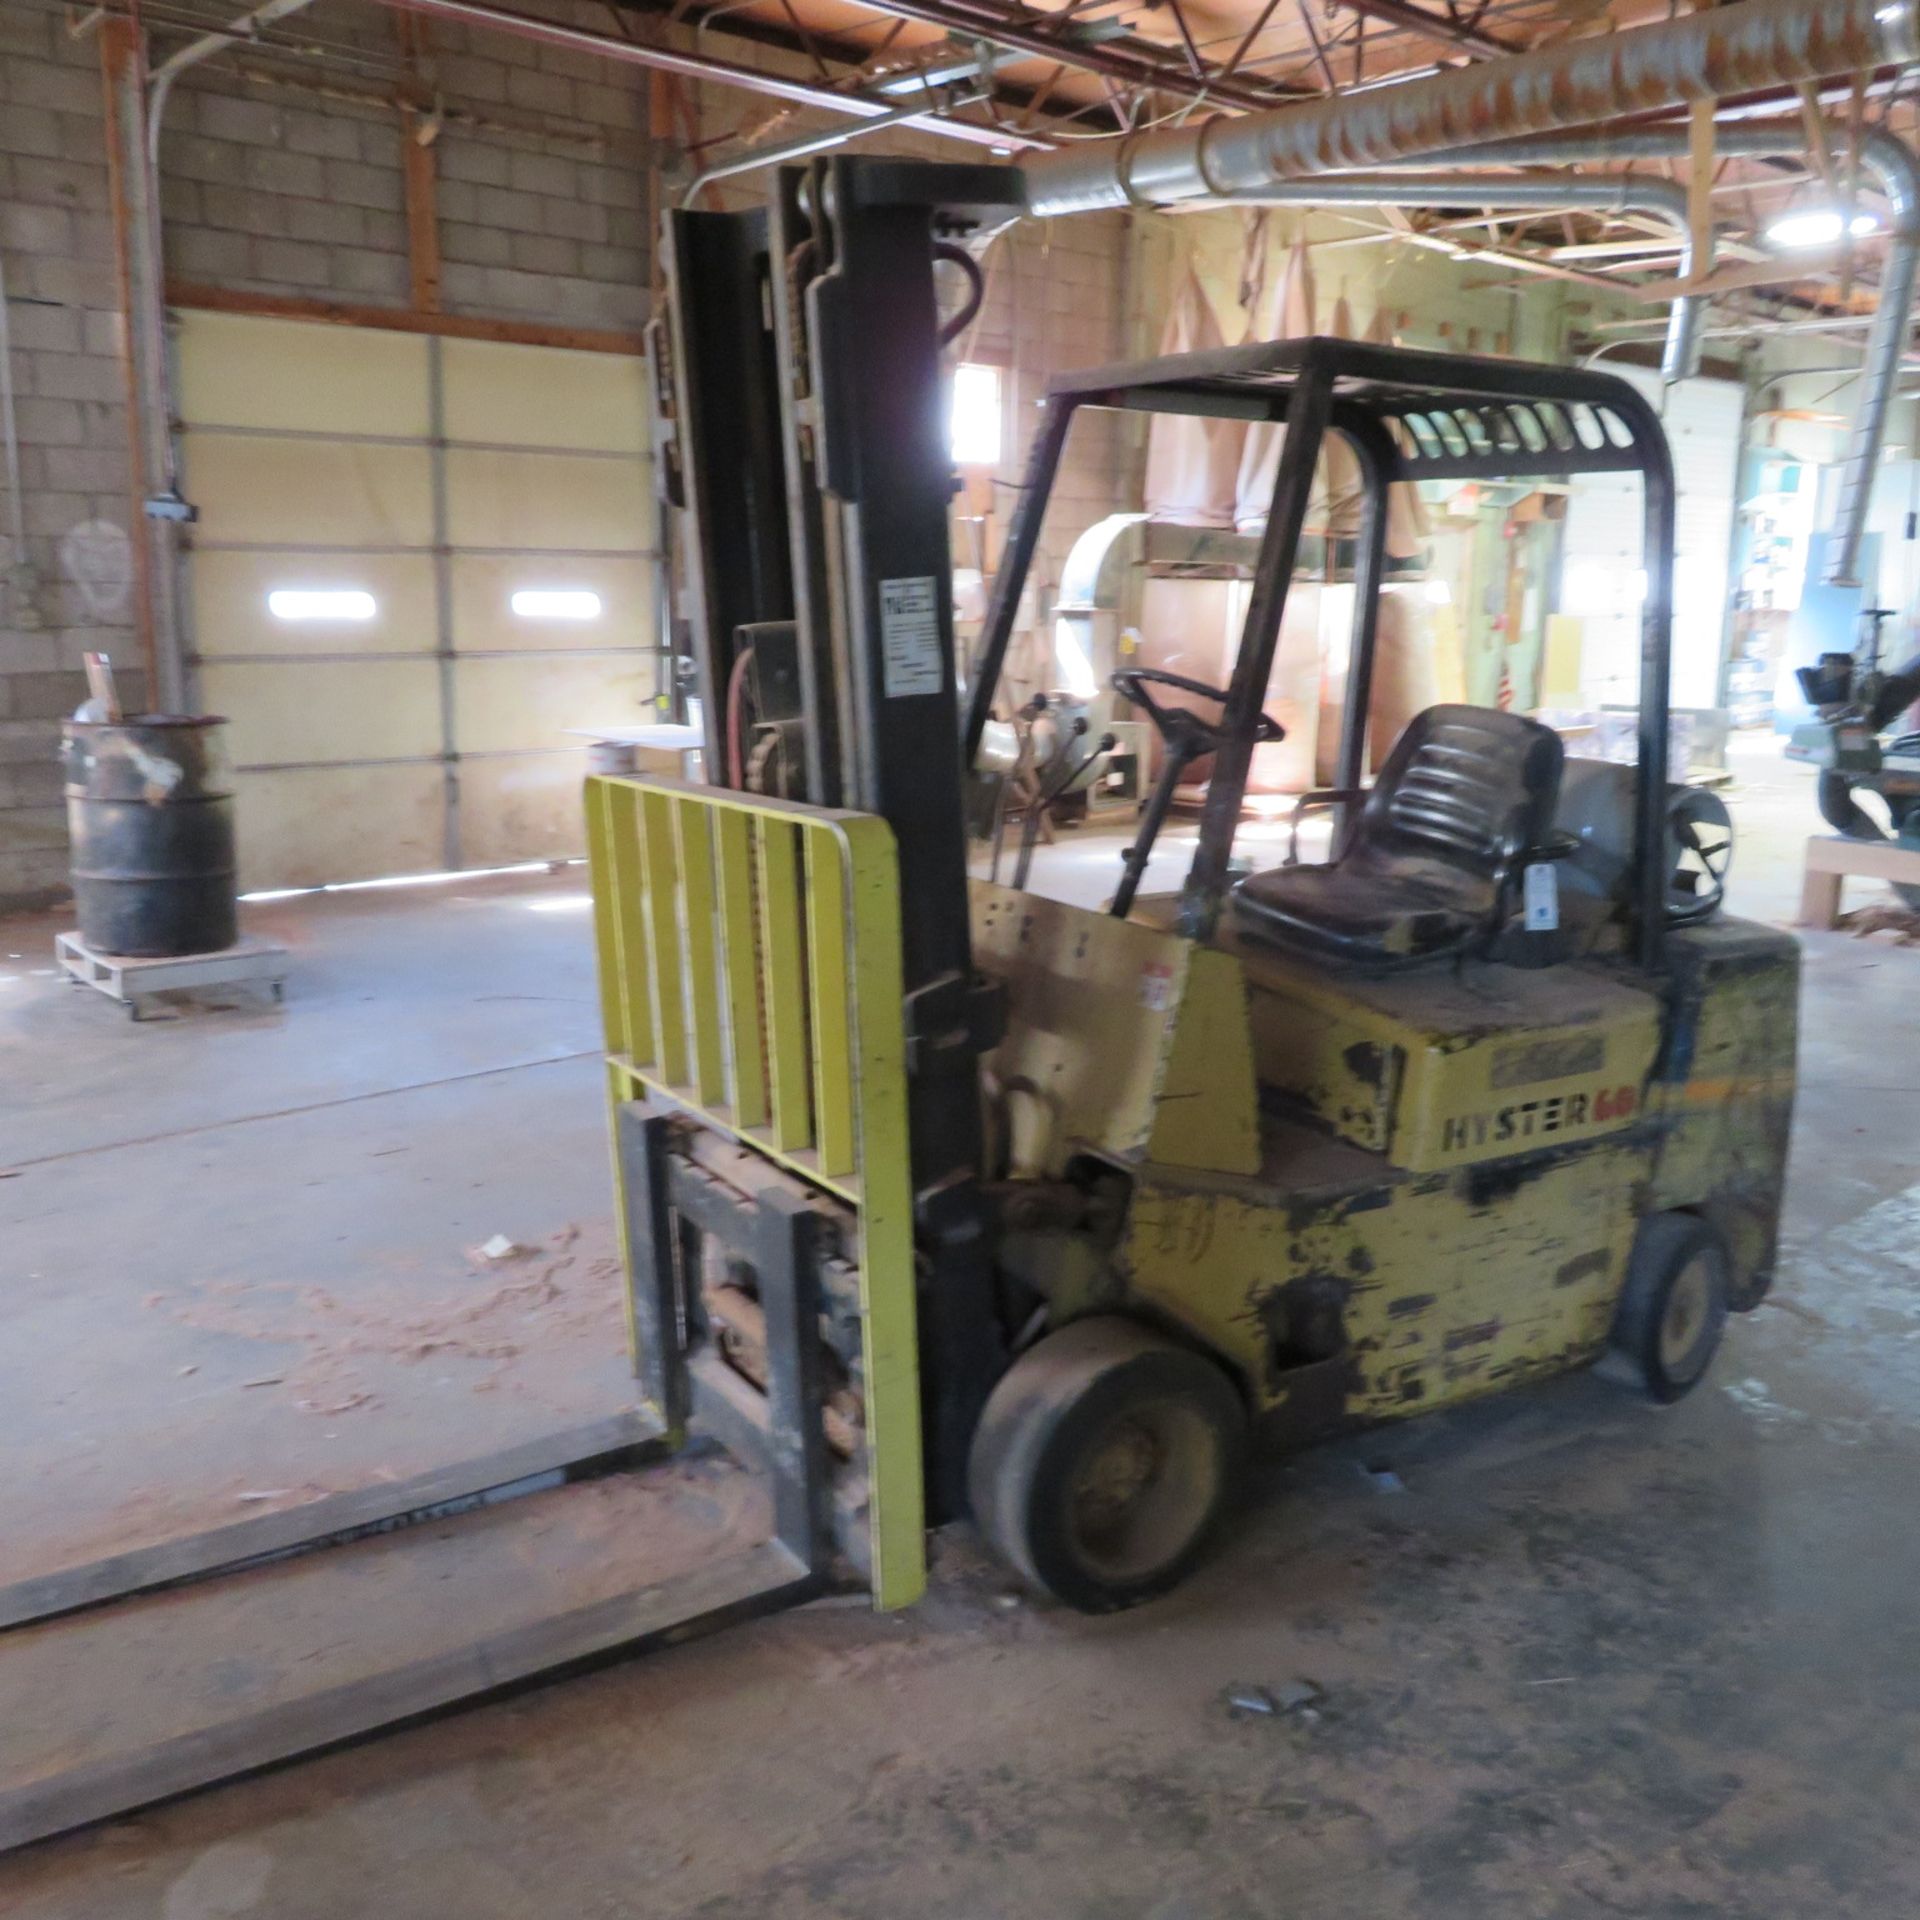 Hyster LP Forklift with 3 Stage 7' Mast, 6200LBS Capacity, Side Shift, HRS:7094, S/N: A187V05182G